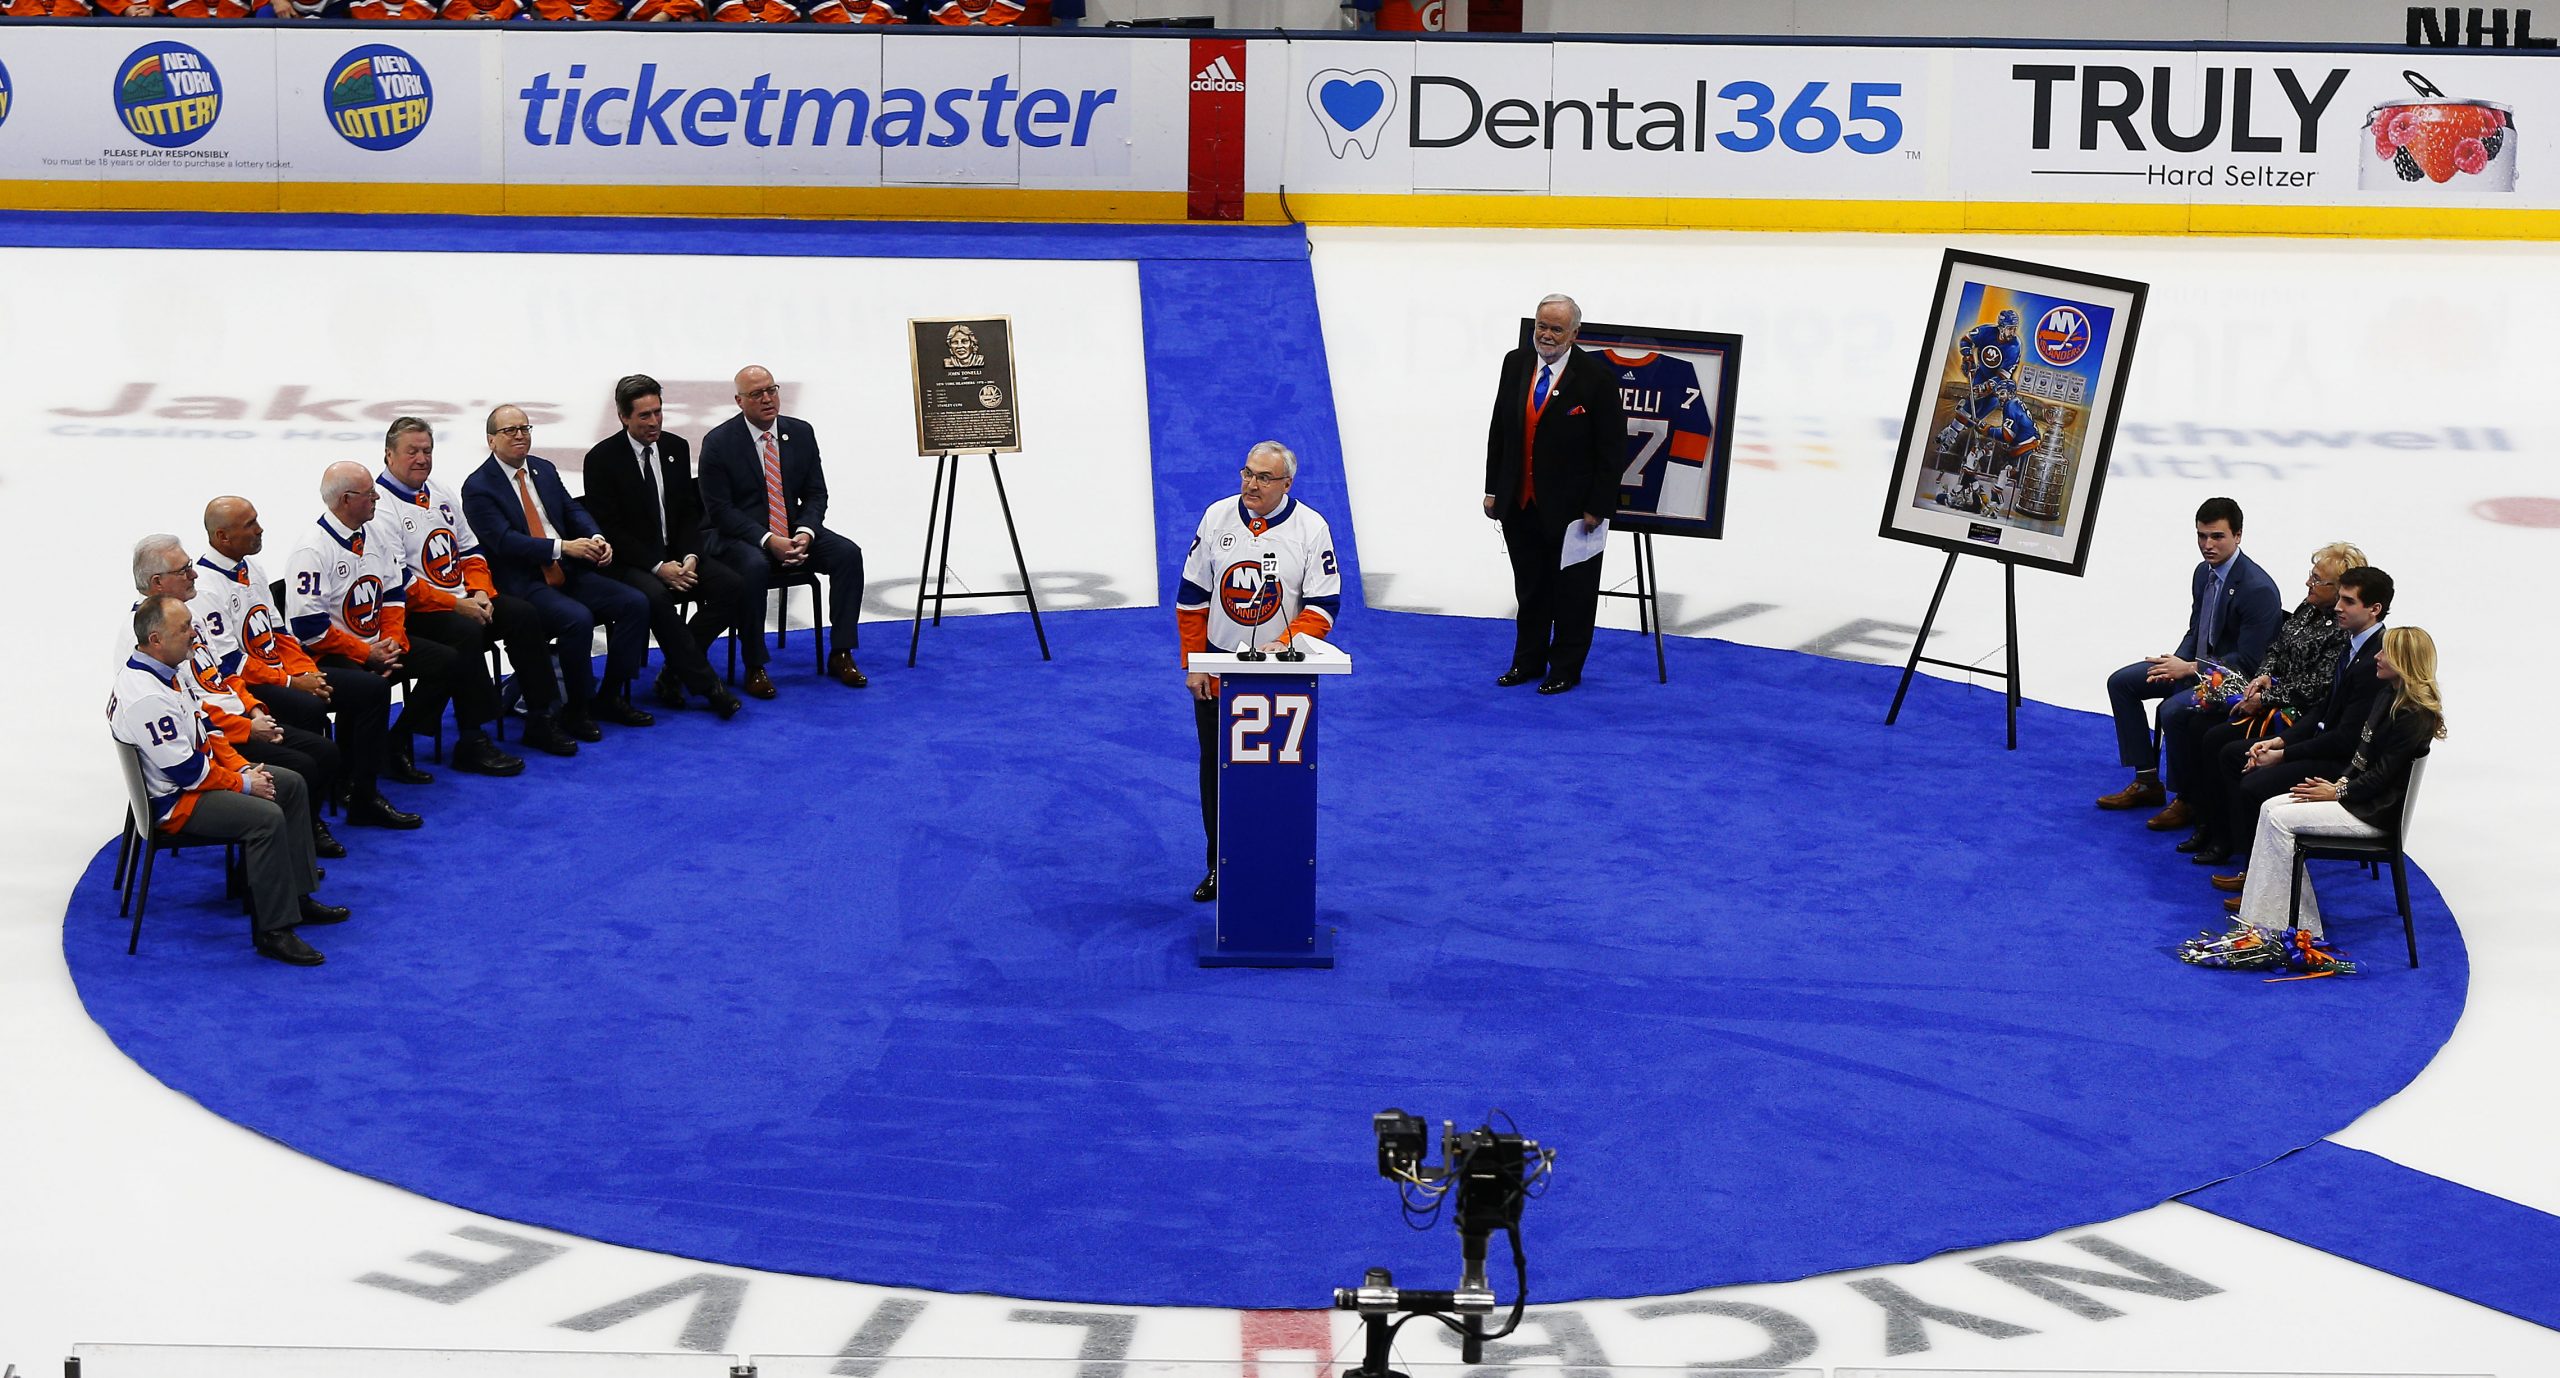 Feb 21, 2020; Uniondale, New York, USA; New York Islanders former player John Tonelli speaks during a retirement ceremony for his number 27 jersey before a game against the Detroit Red Wings at Nassau Veterans Memorial Coliseum. Mandatory Credit: Andy Marlin-USA TODAY Sports